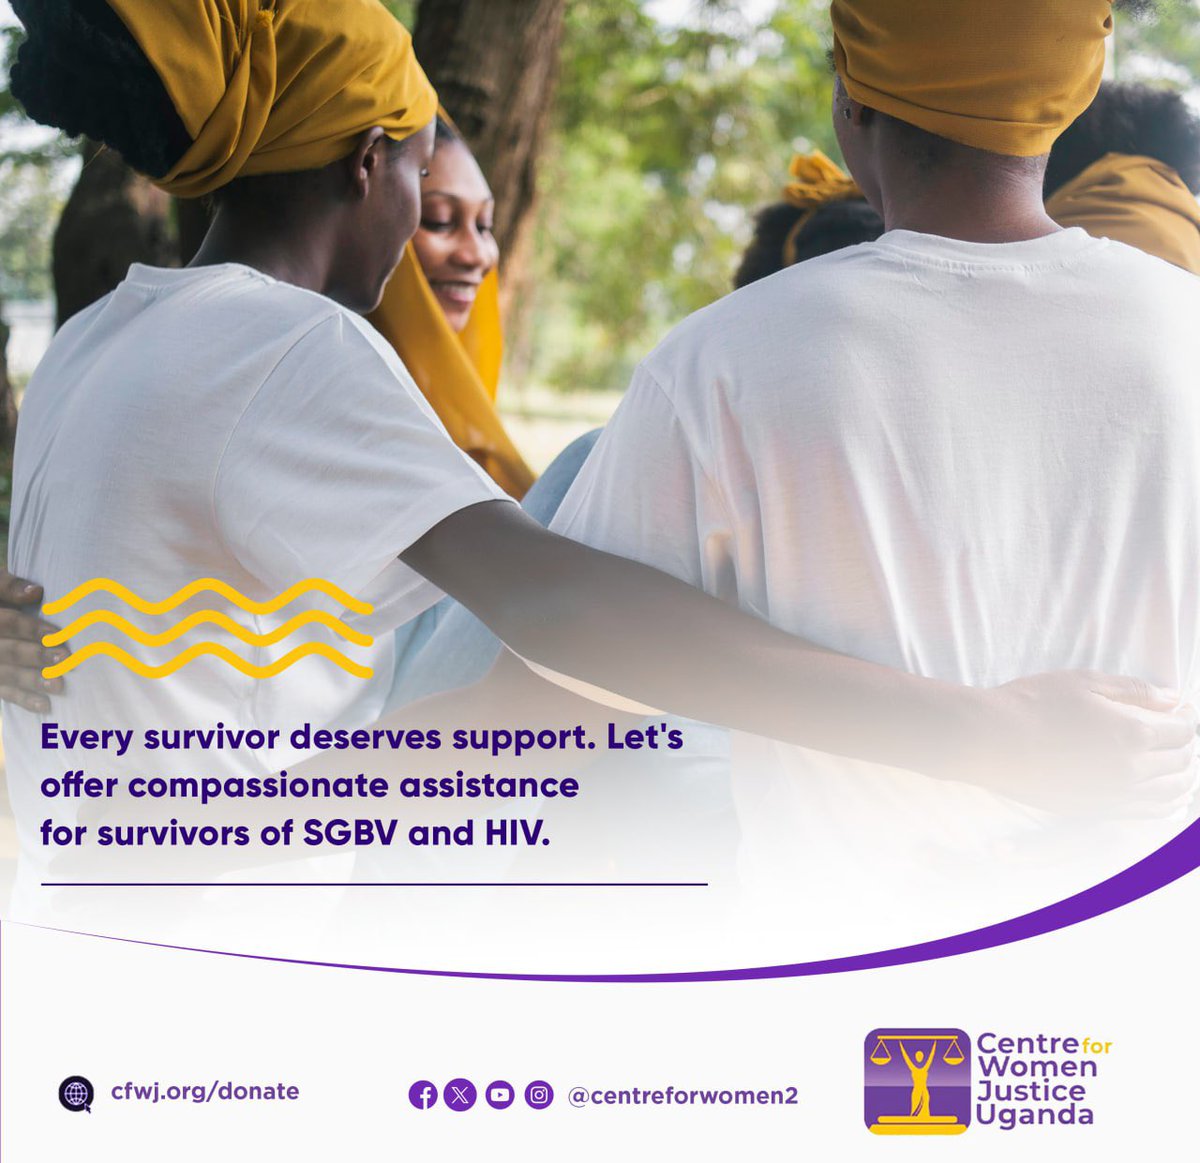 It is crucial that we extend our support and empathy towards survivors of Sexual and Gender-Based Violence (SGBV) and HIV. Let's work together to provide them with the assistance they need and deserve. #CentreForWomenJusticeUganda